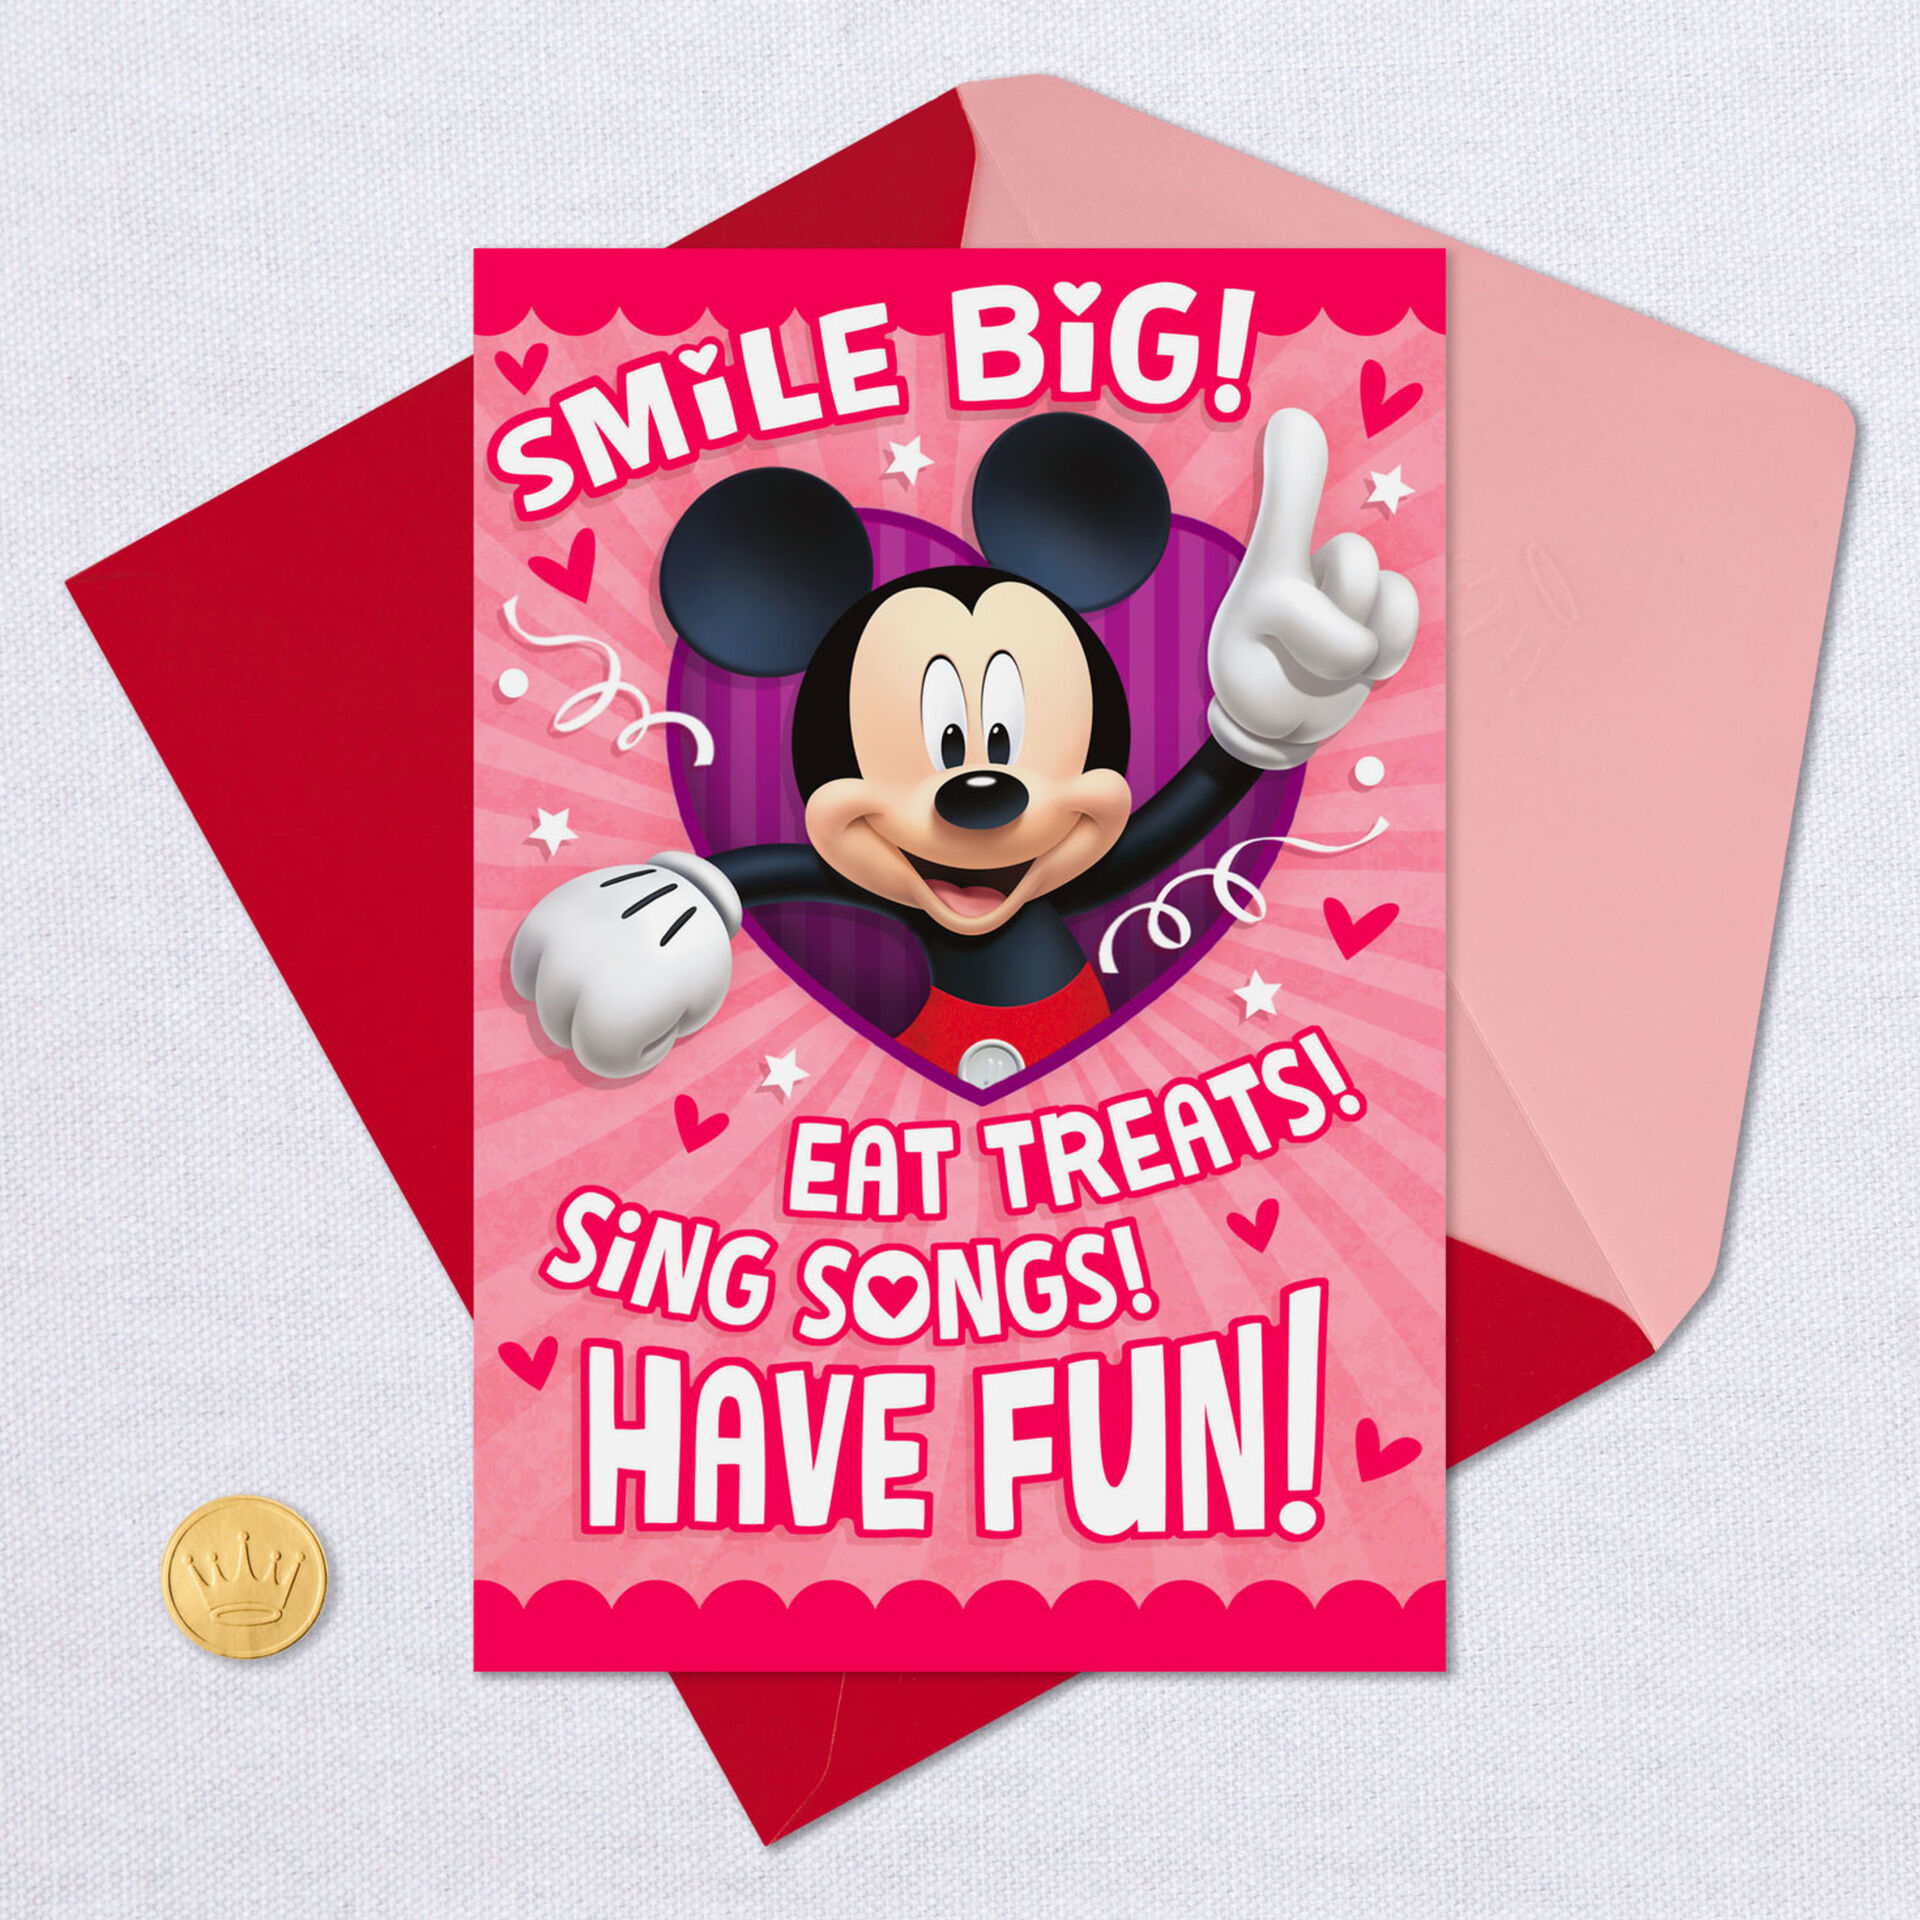 disney-mickey-mouse-musical-valentine-s-day-card-for-kids-greeting